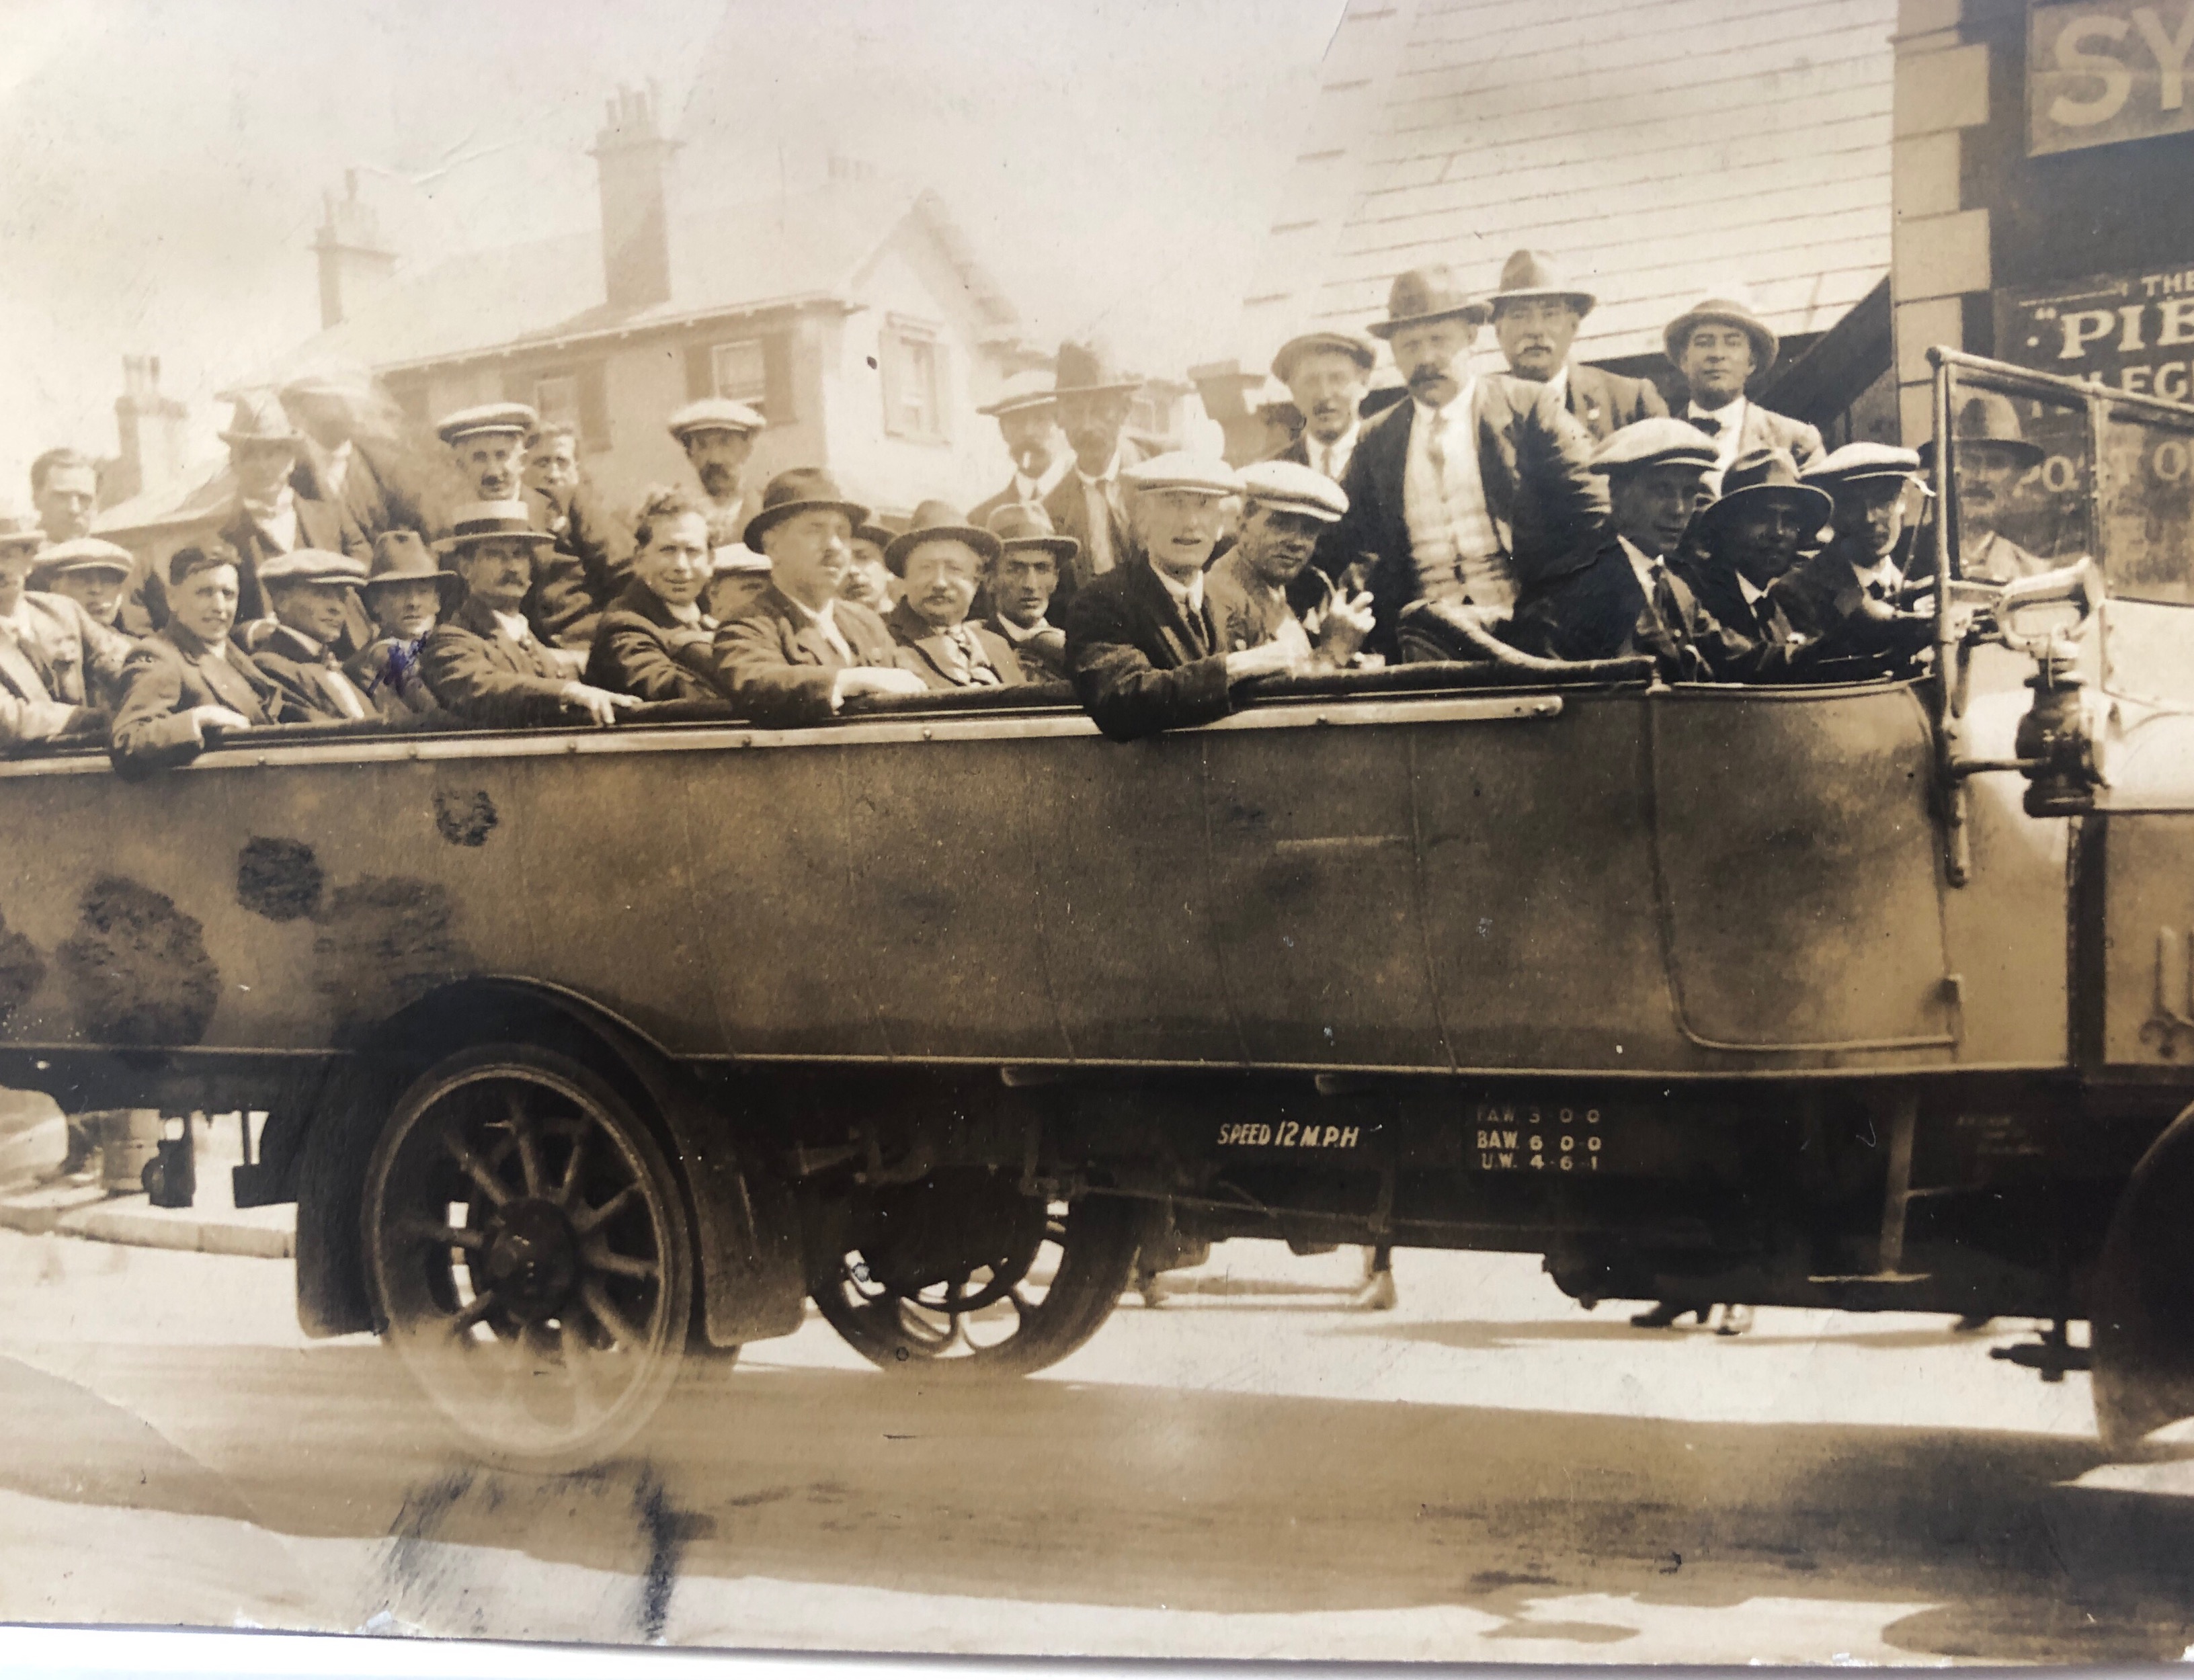 Oddfellows Charabanc outing approx 1931 possibly Portsmouth